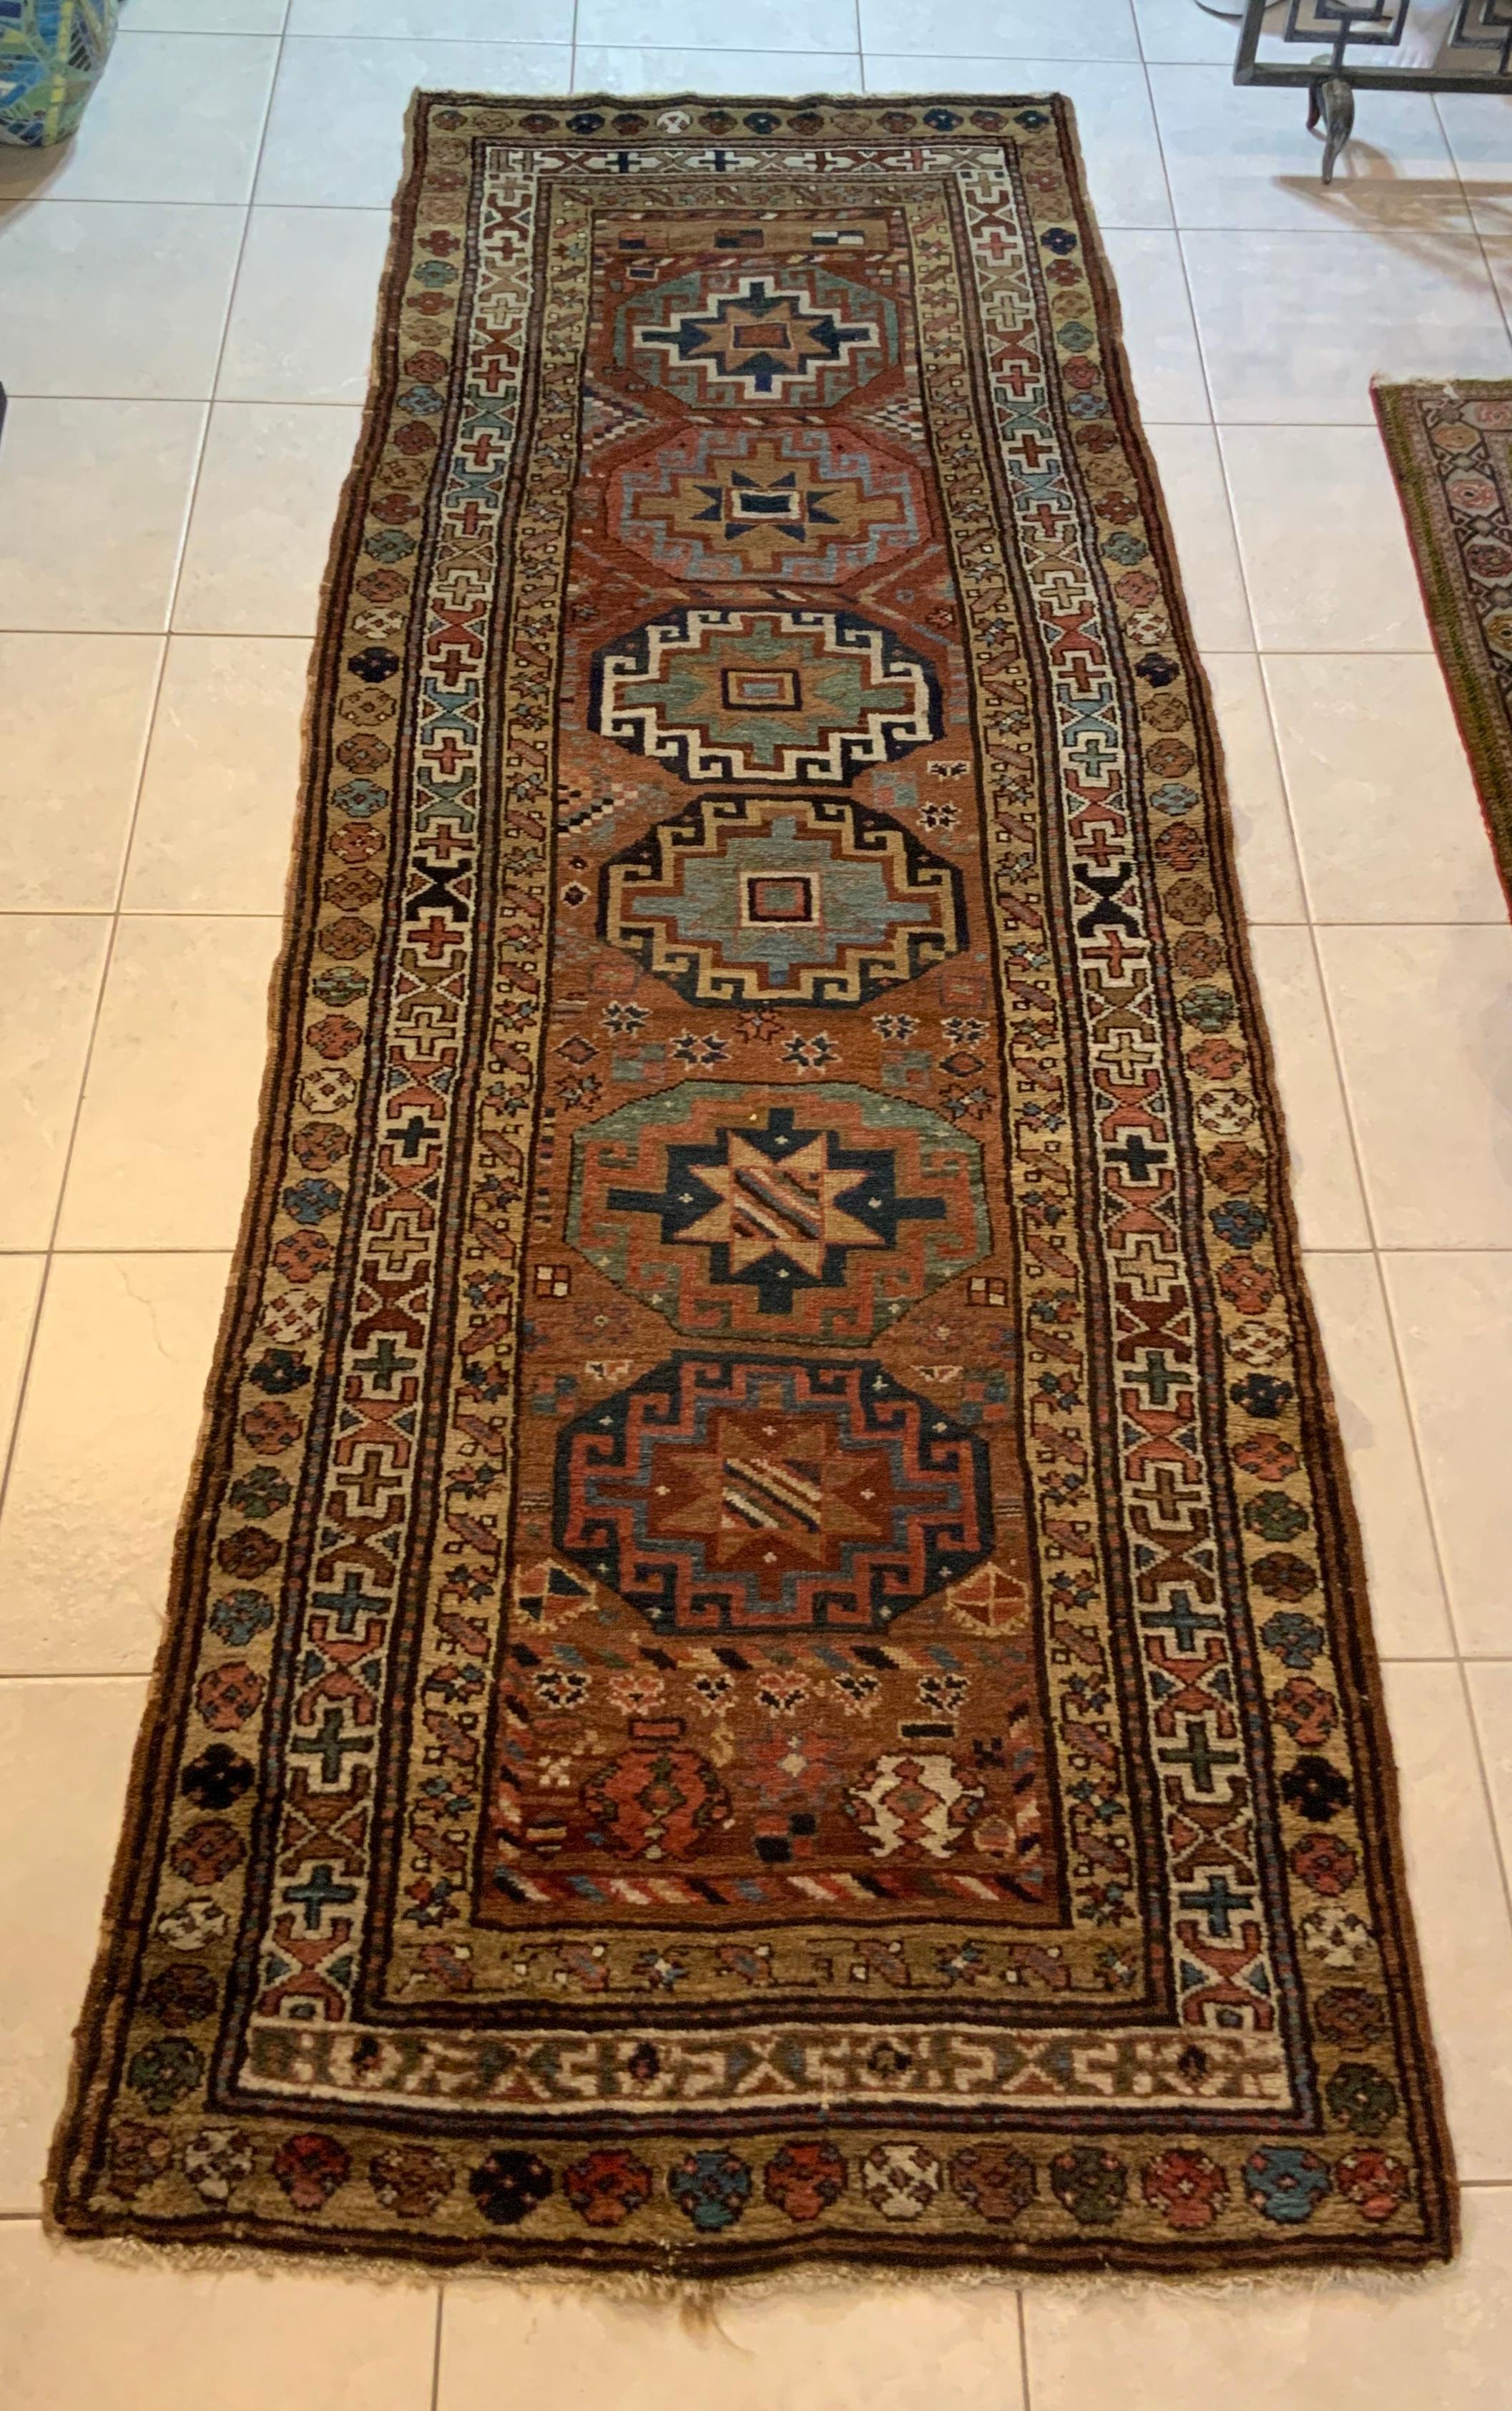 Wonderful antique tribal Caucasian Kazak rug handwoven geometric design with beautiful natural colors entirely hand knotted with wool pile, minor professional repair due to age professional washed and cleaned ready to use, one of a kind.